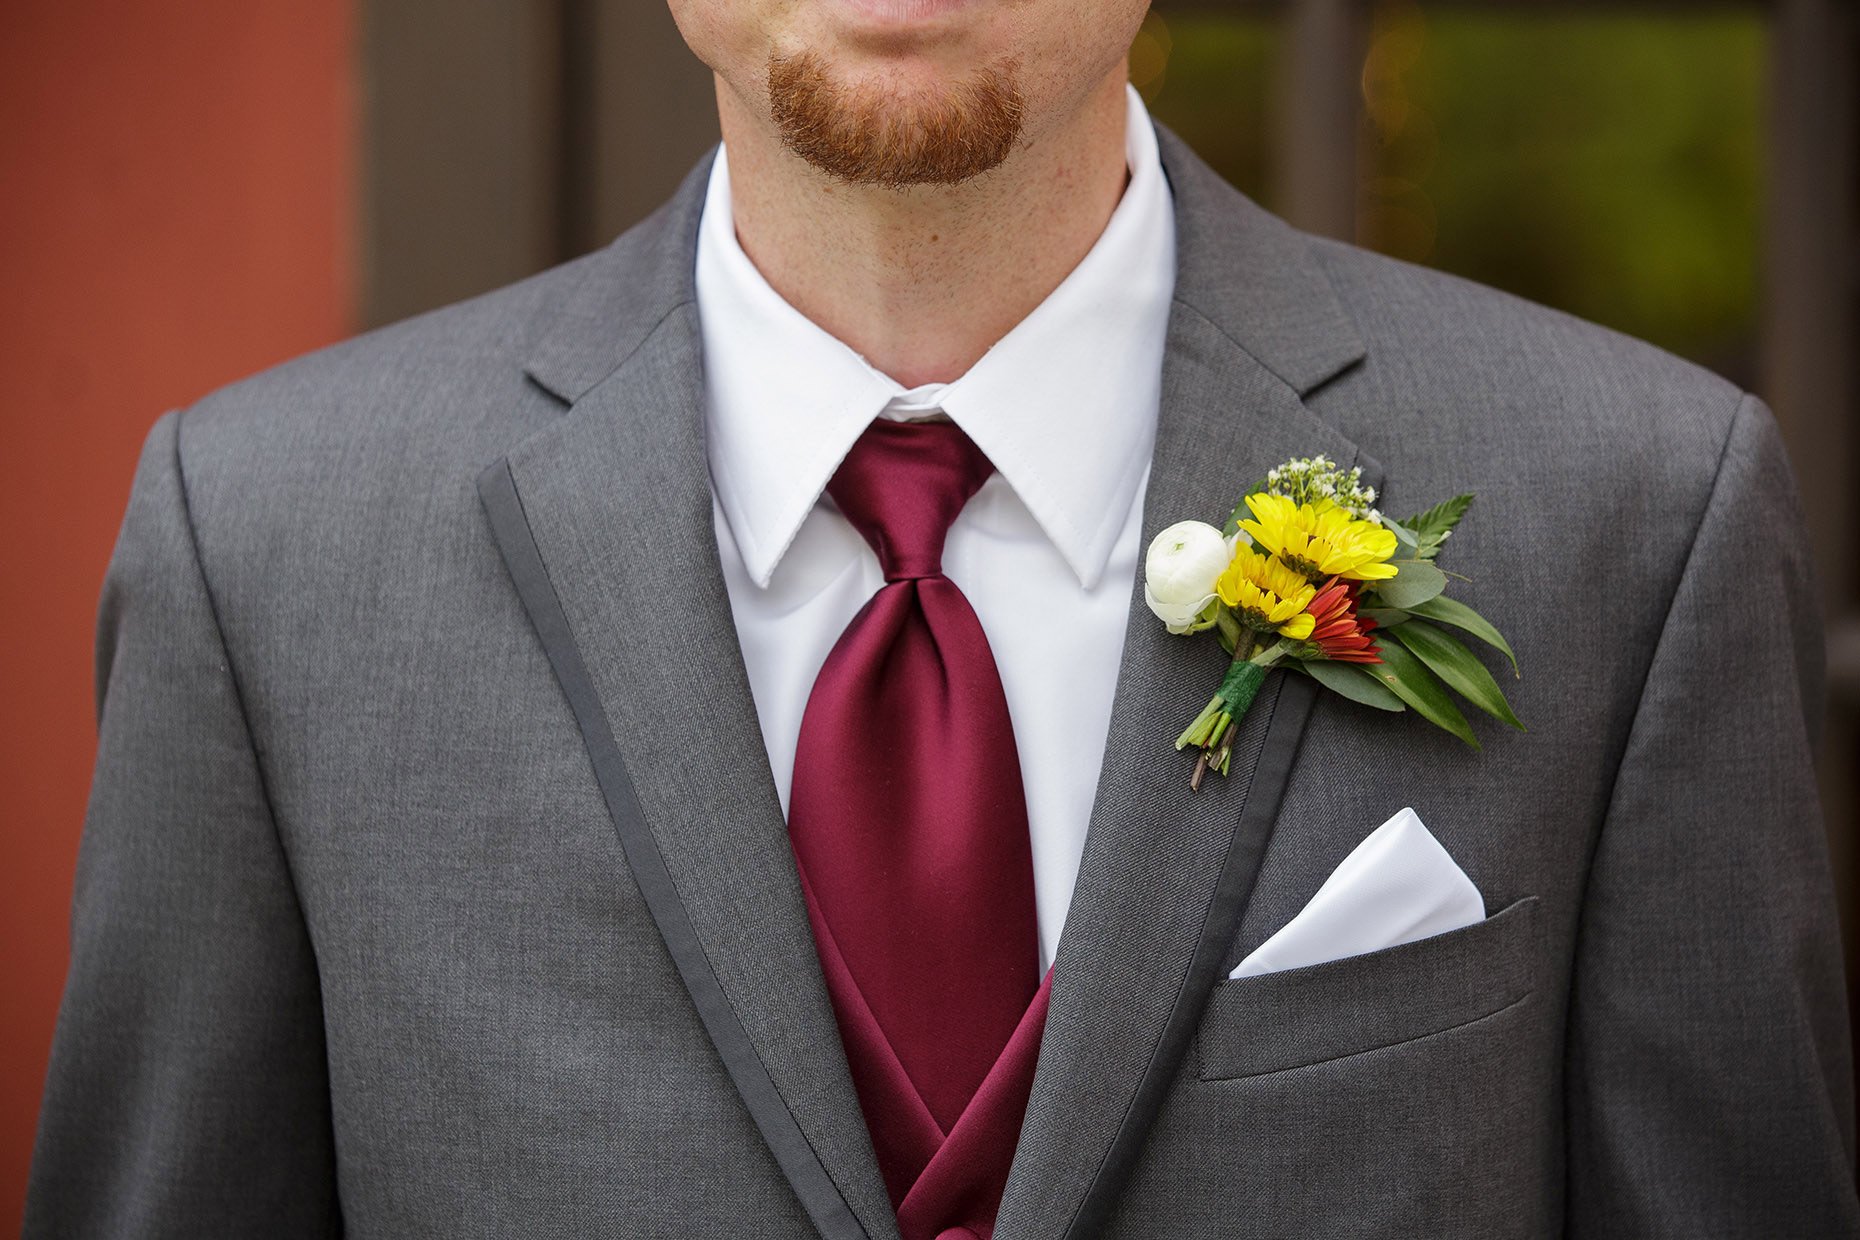 Groom's Boutonniere in gray suit